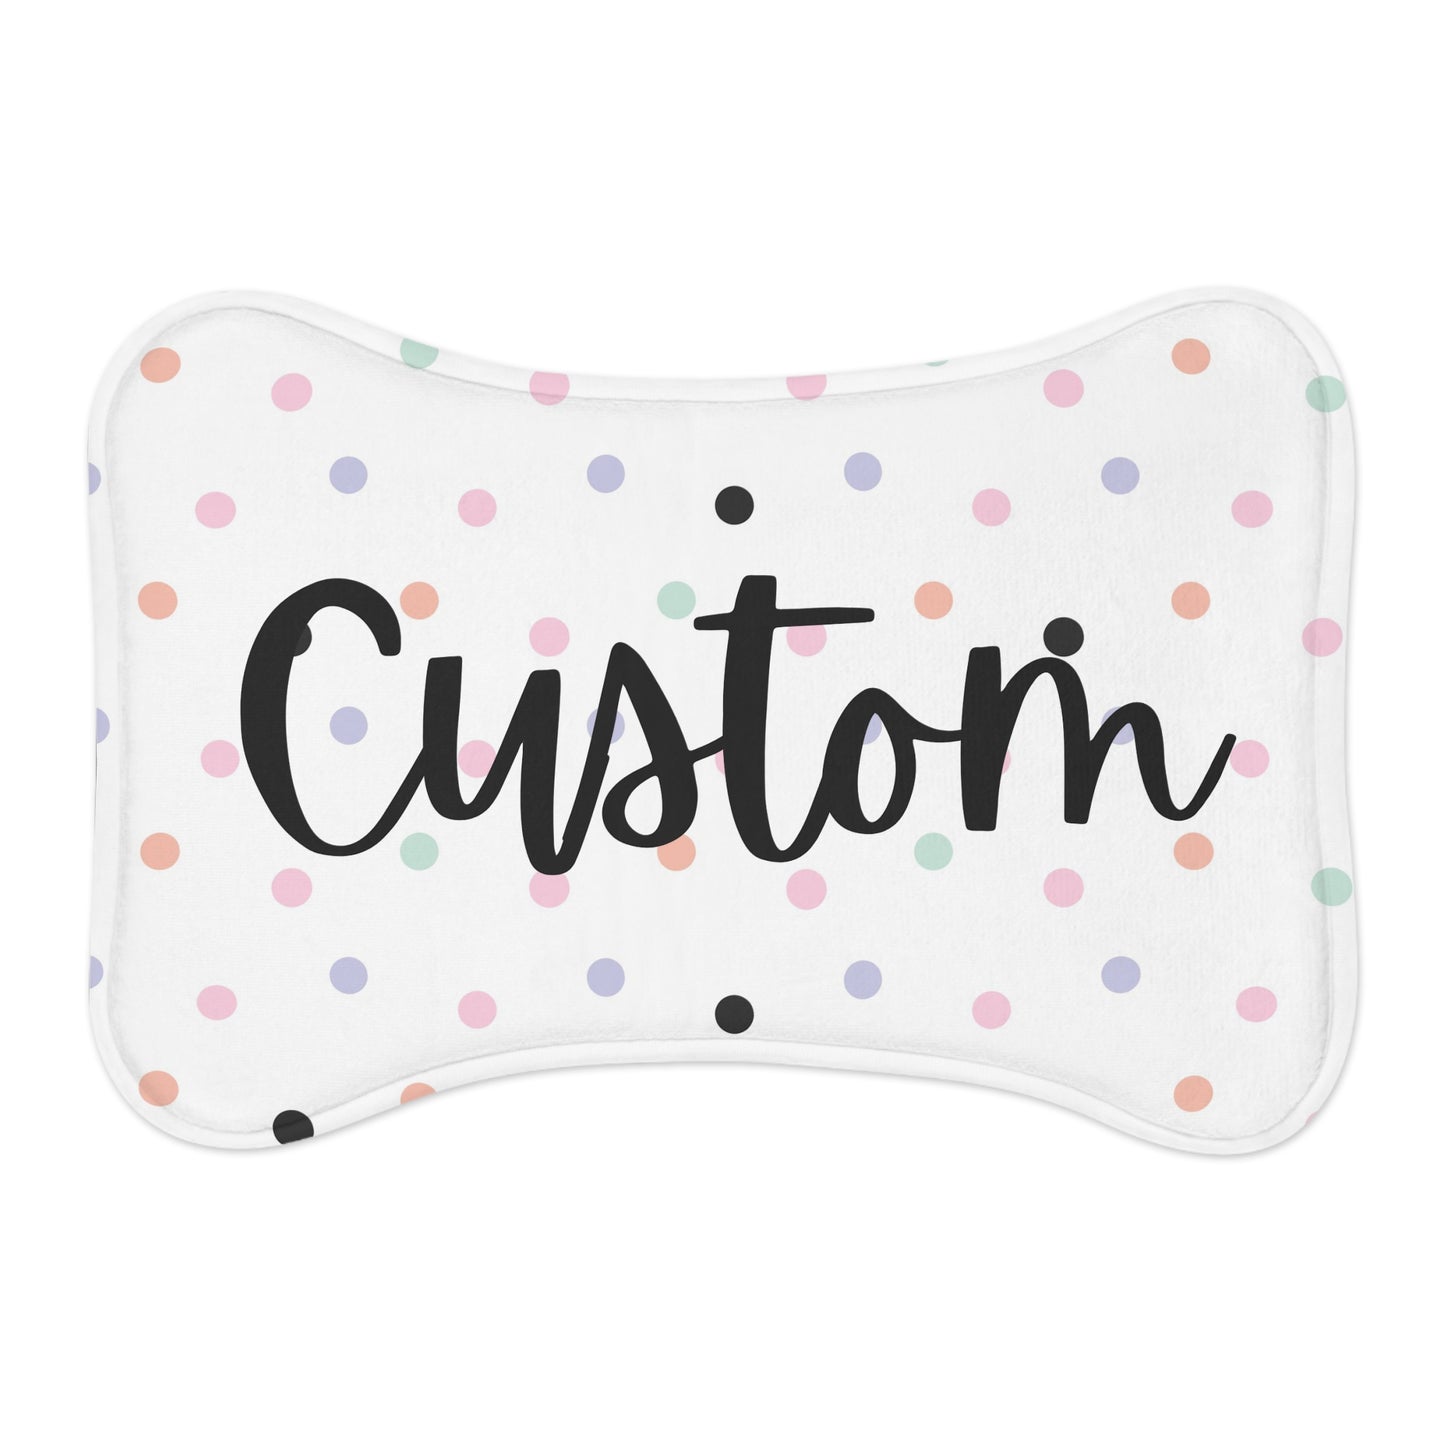 Custom Name Pet Feeding Mat - Personalized Plush Blanket for Dogs Cats, Ideal New Puppy or Baby Shower Gift, Soft & Durable Pet Accessory